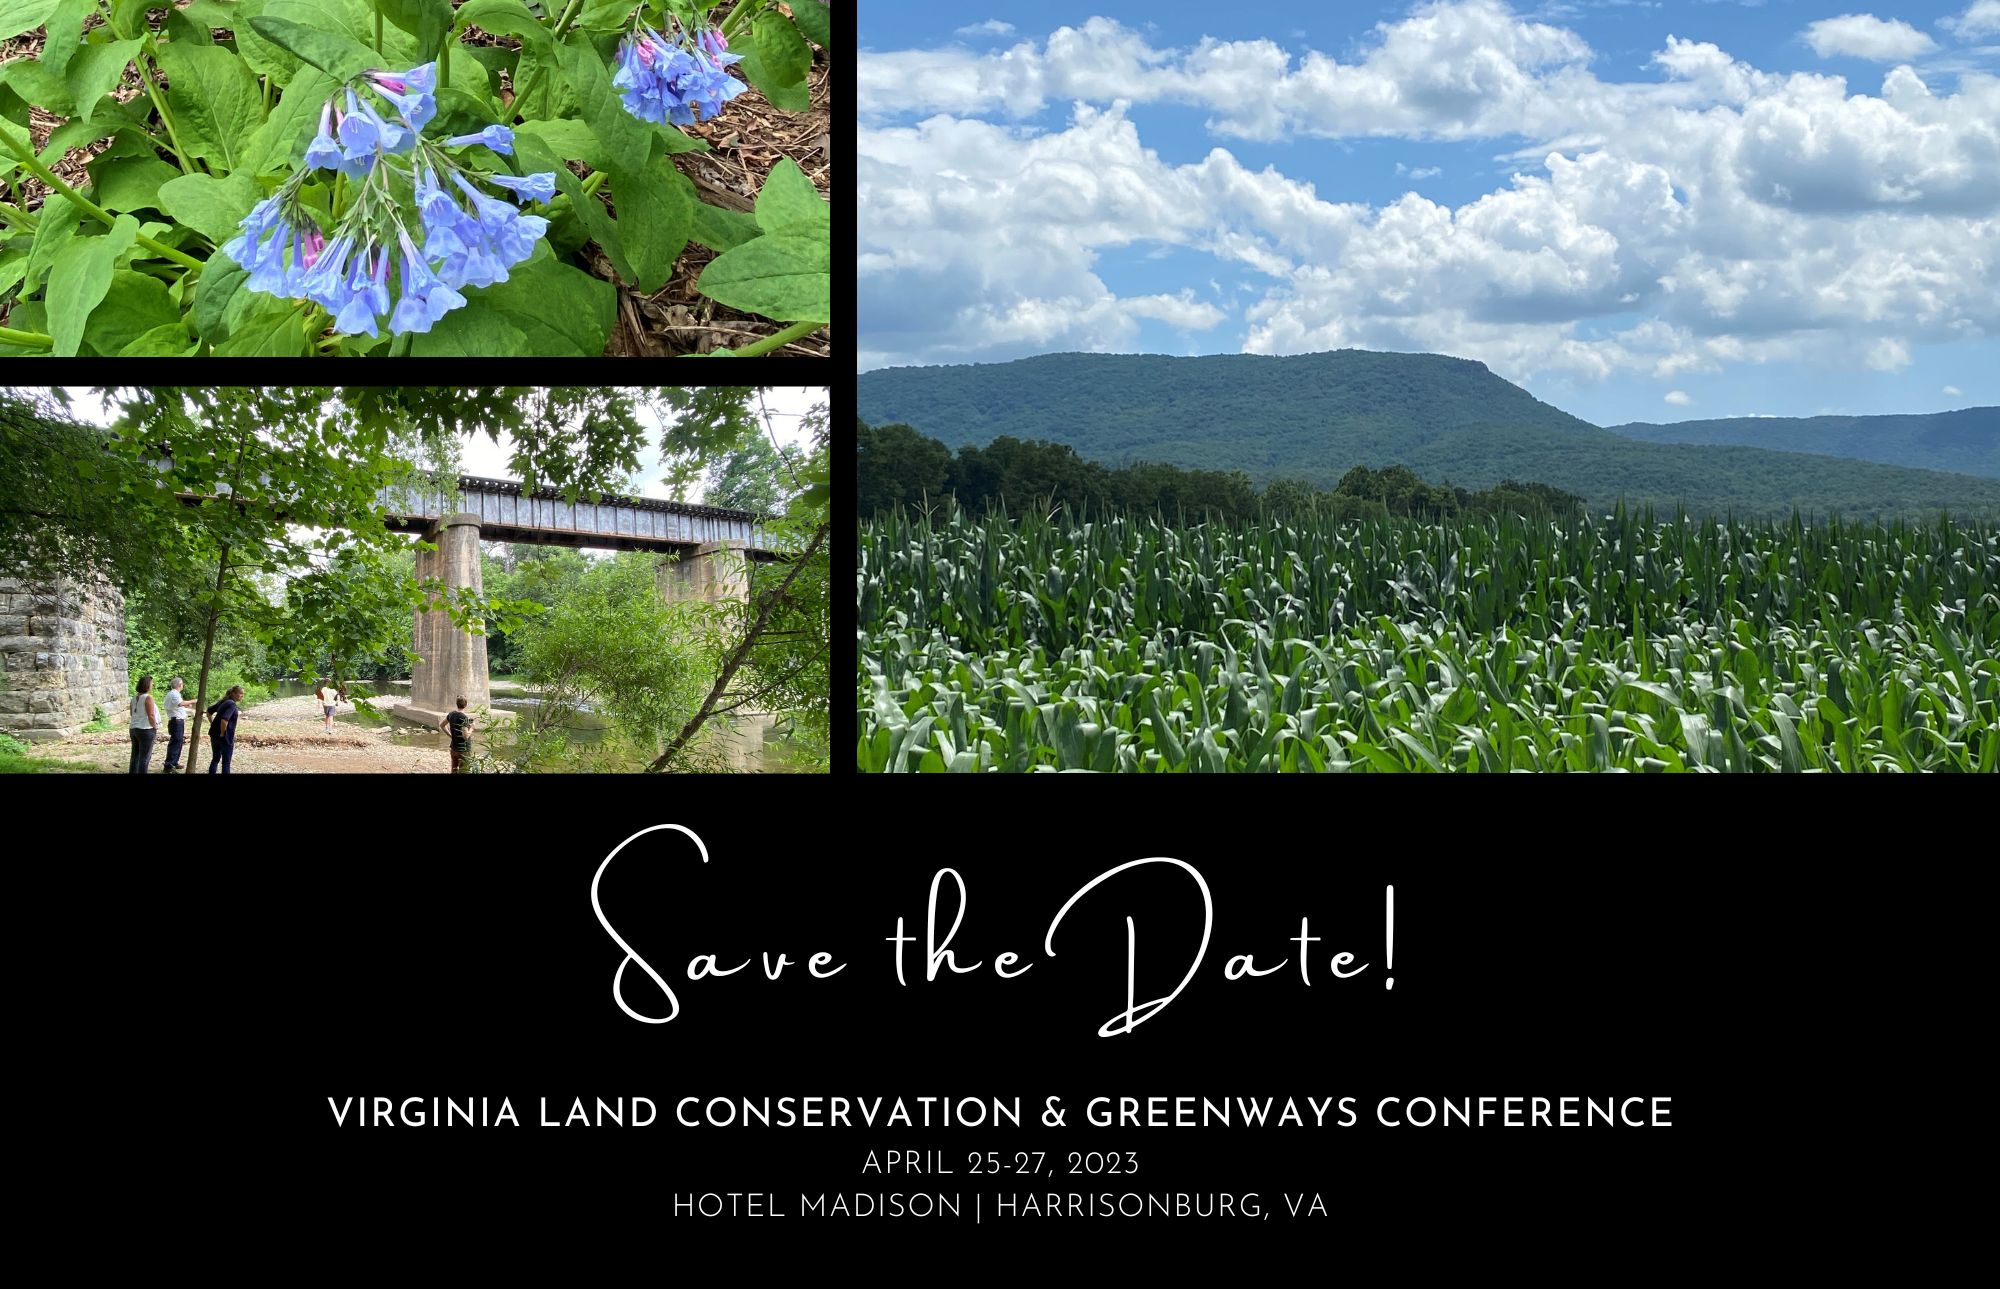 Save the date for the Virginia Land Conference in 2023